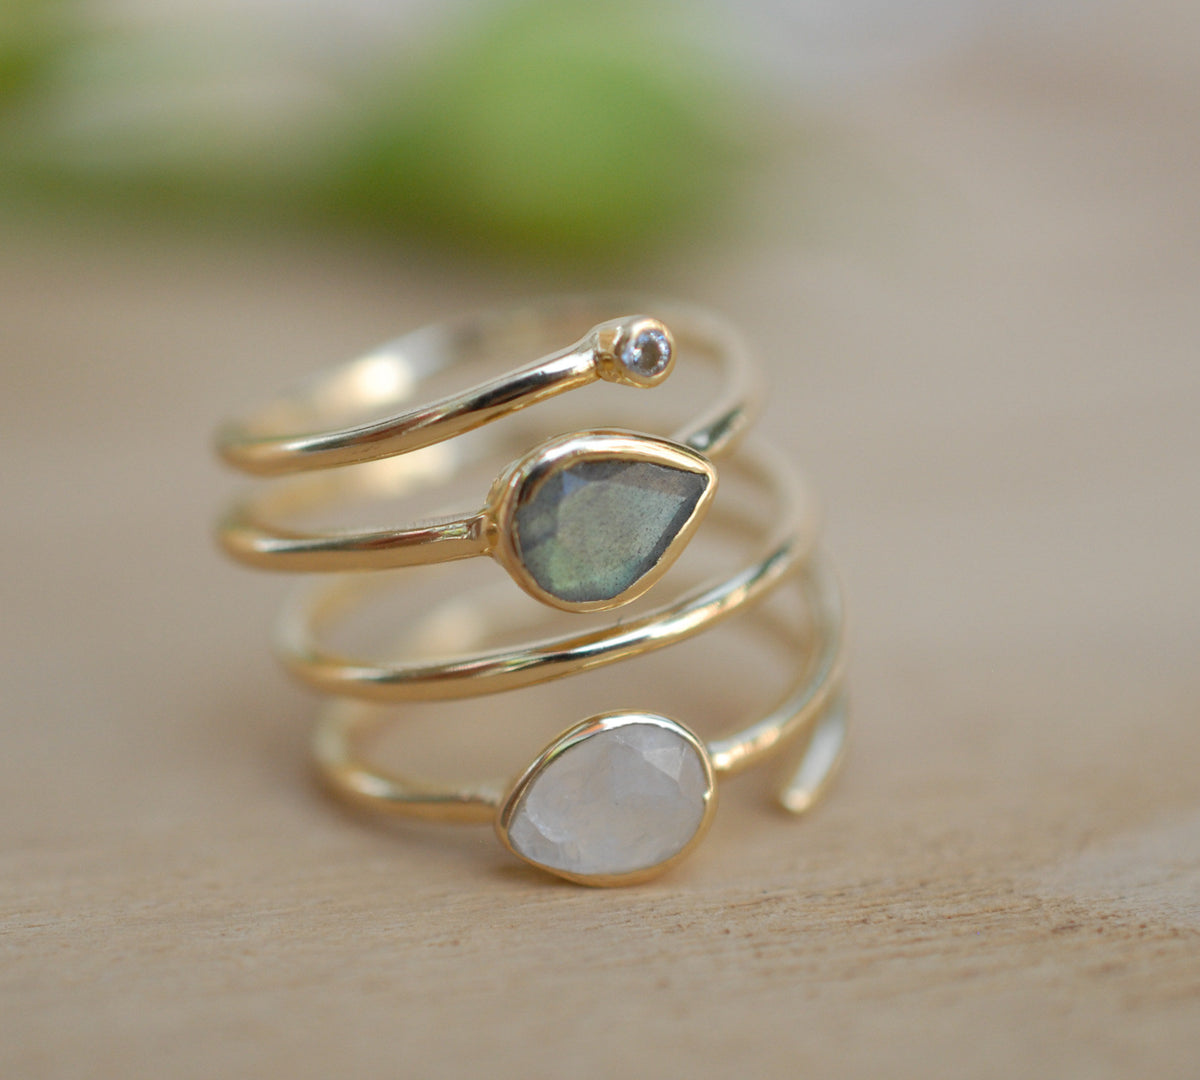 Labradorite & Moonstone Gold Plated 18k Ring * Rainbow stone* Gemstones *Handmade *Statement *Gift for her*Spiral Ring Jewelry*Bycila*BJR057